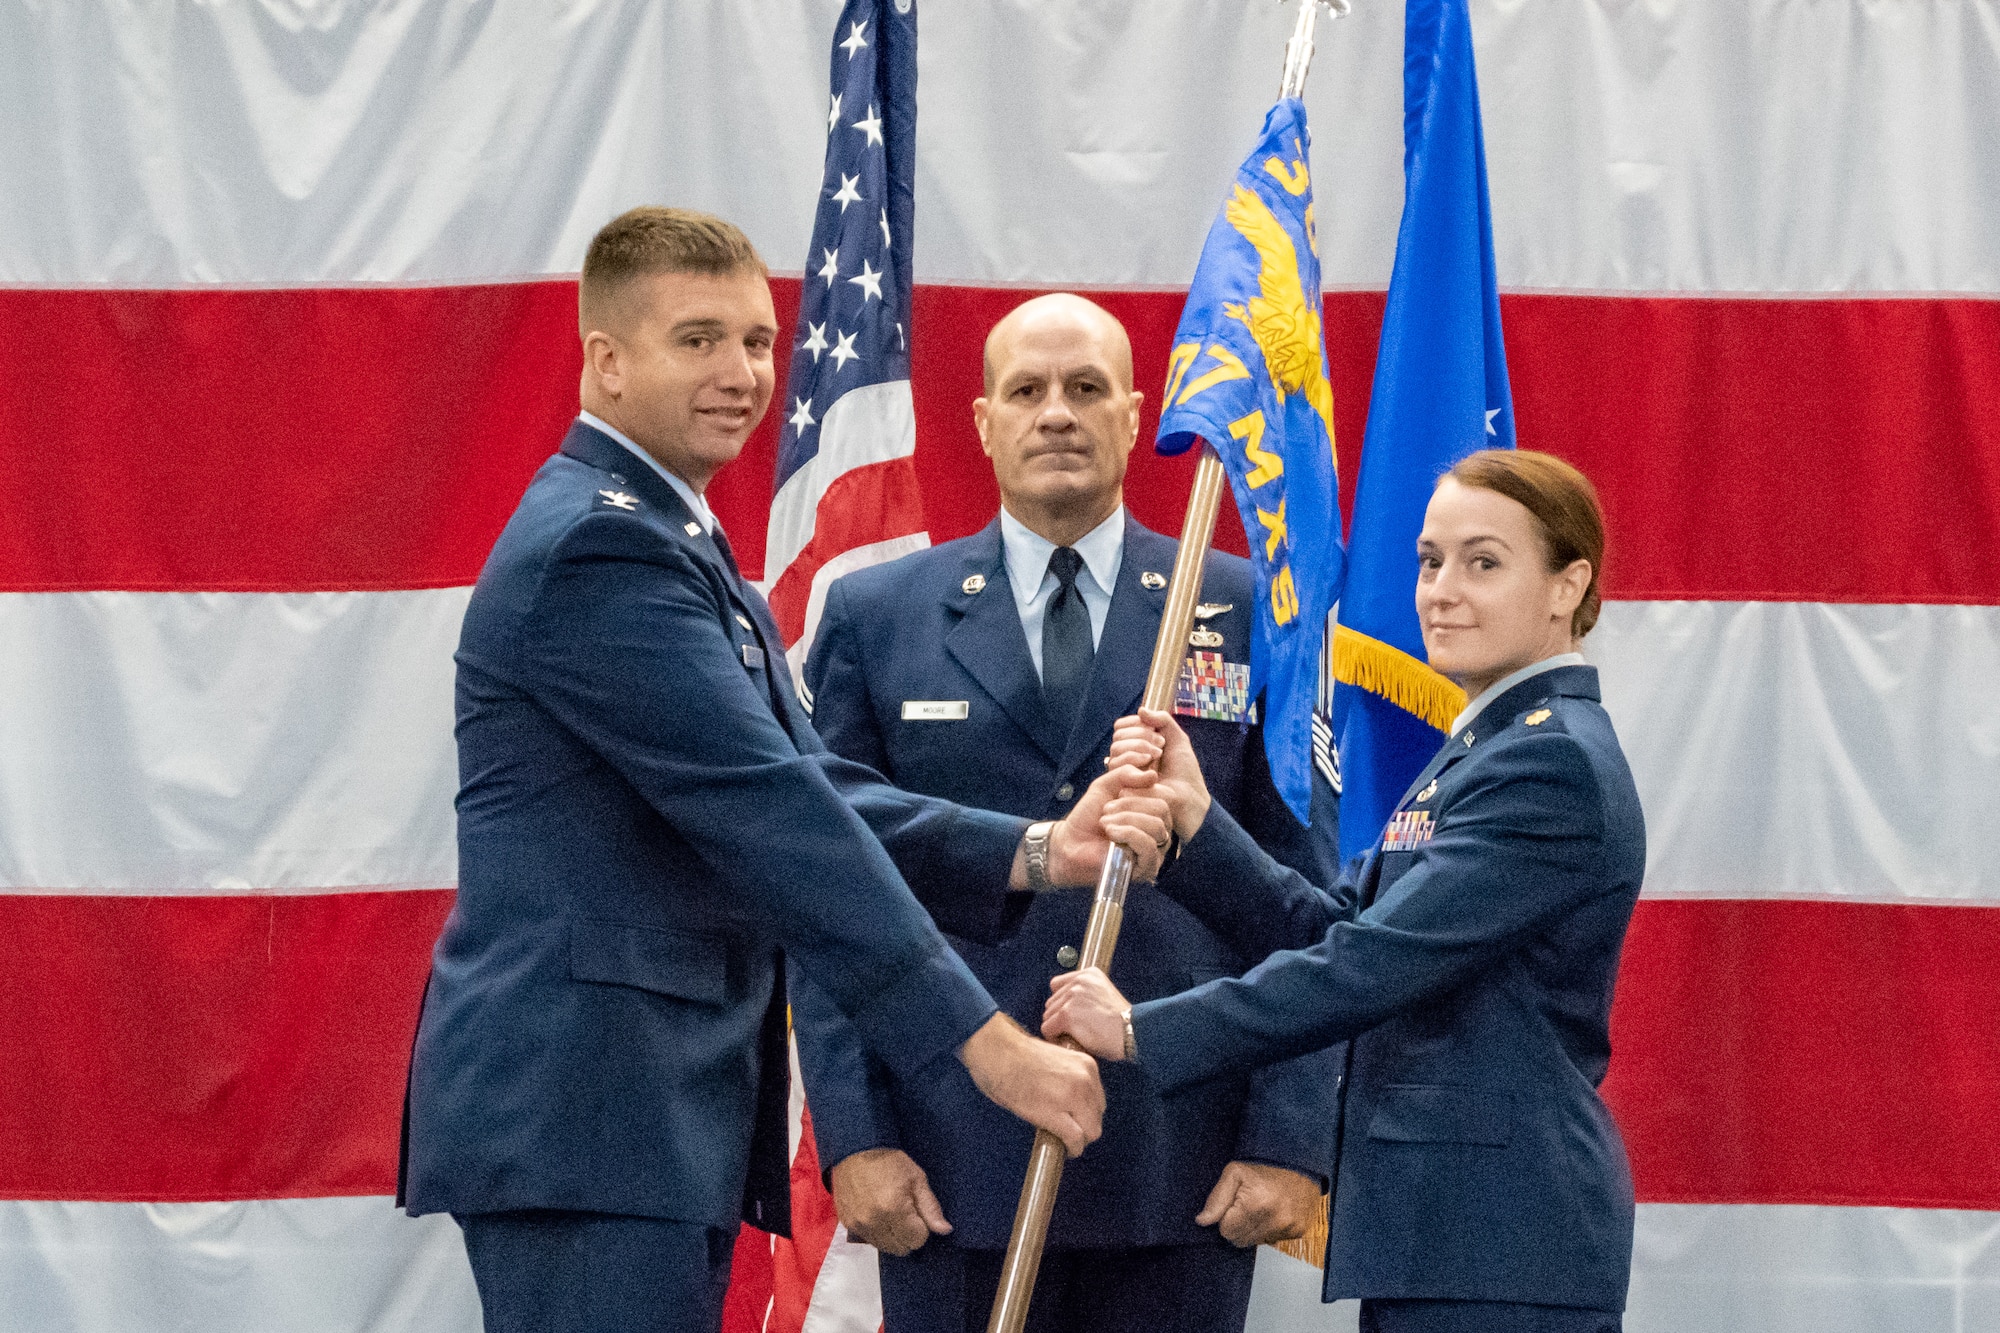 U.S. Air Force Col. Casey Cooley, 307th Maintenance Group commander, hands the 707th Maintenance Squadron guidon to the unit’s new commander Maj. Jessica Oberlander, during the unit’s change of command ceremony at Barksdale Air Force Base, Louisiana, August 5, 2018.   Oberlander comes to the unit from Headquarters, U.S. Air Force in Washington D.C. where she served as the chief for Global Power Product Support Integration and Oversight. (U.S. Air Force photo by Technical Sgt. Cody Burt/Released)